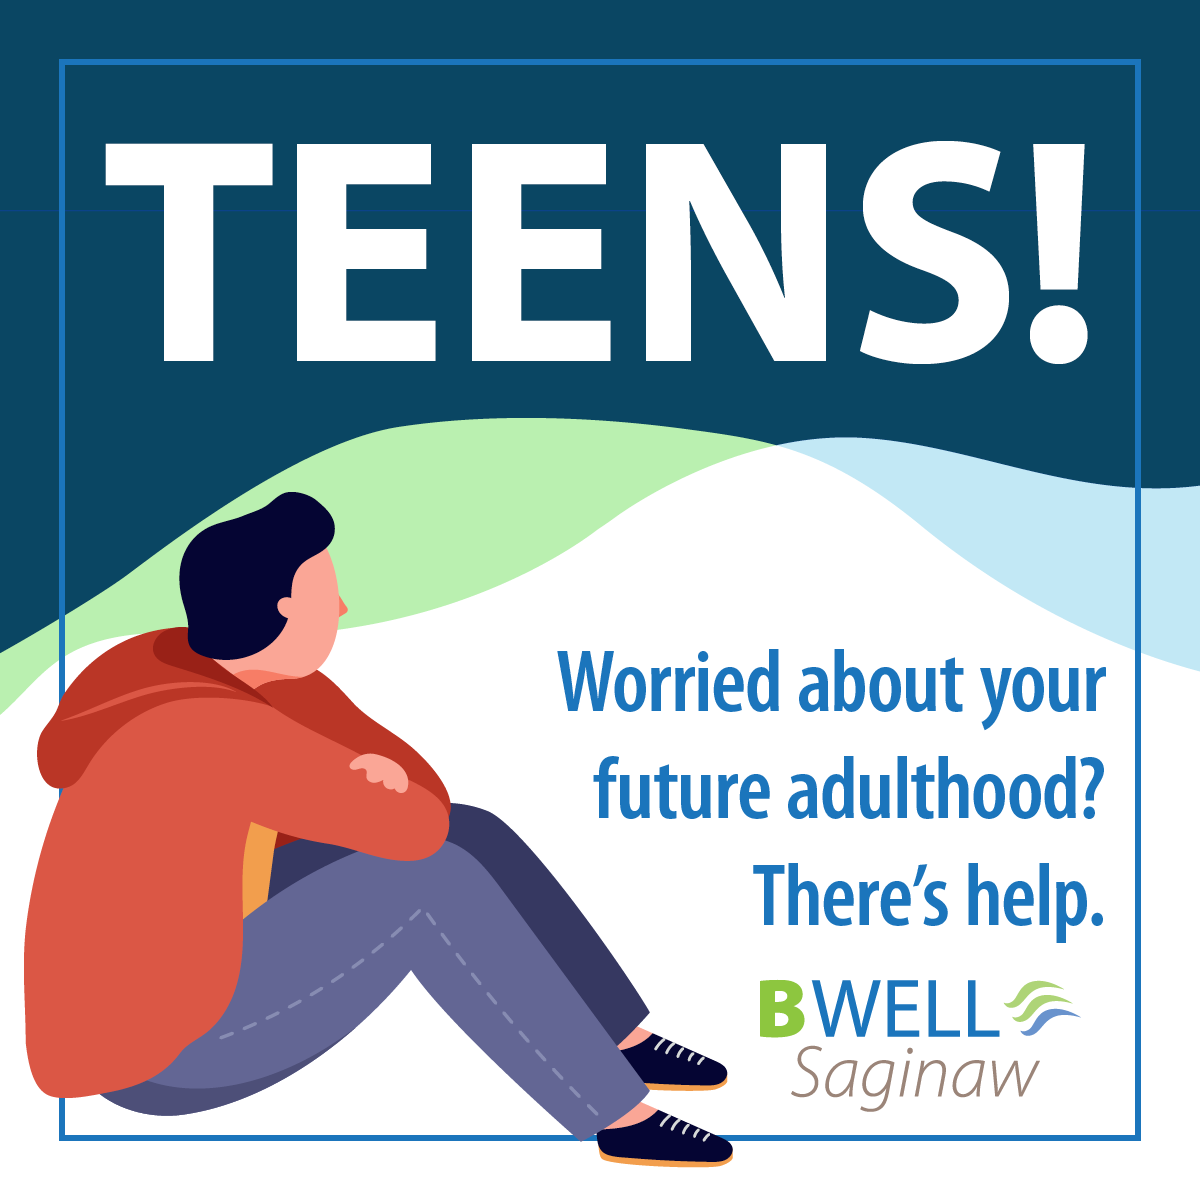 #5: Teens: Worried about your future adulthood? There’s help.